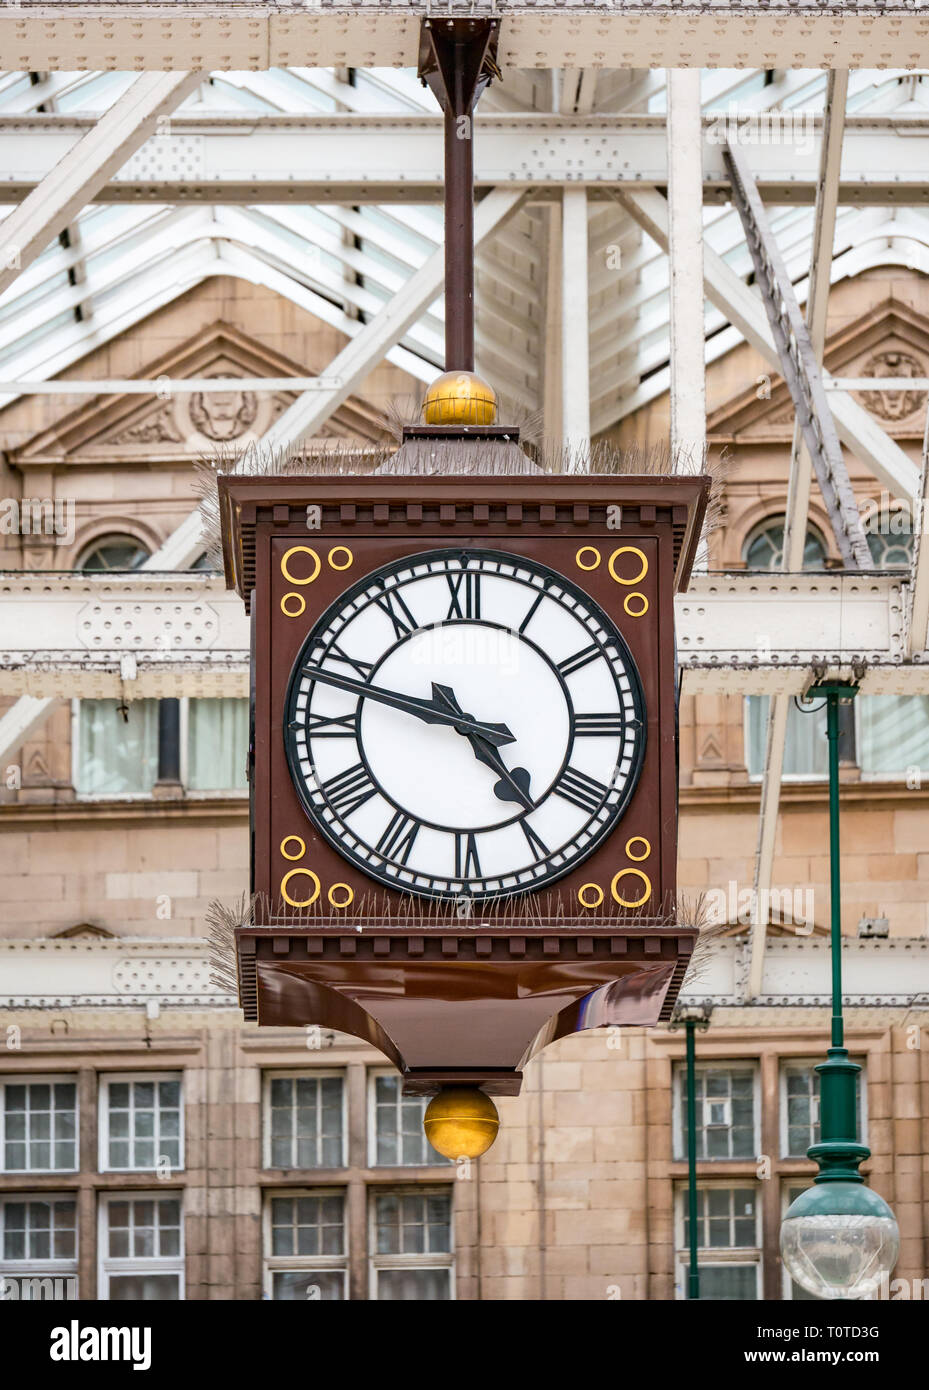 Well known meeting spot, Victorian clock on concourse of Glasgow Central Station, Scotland, UK Stock Photo